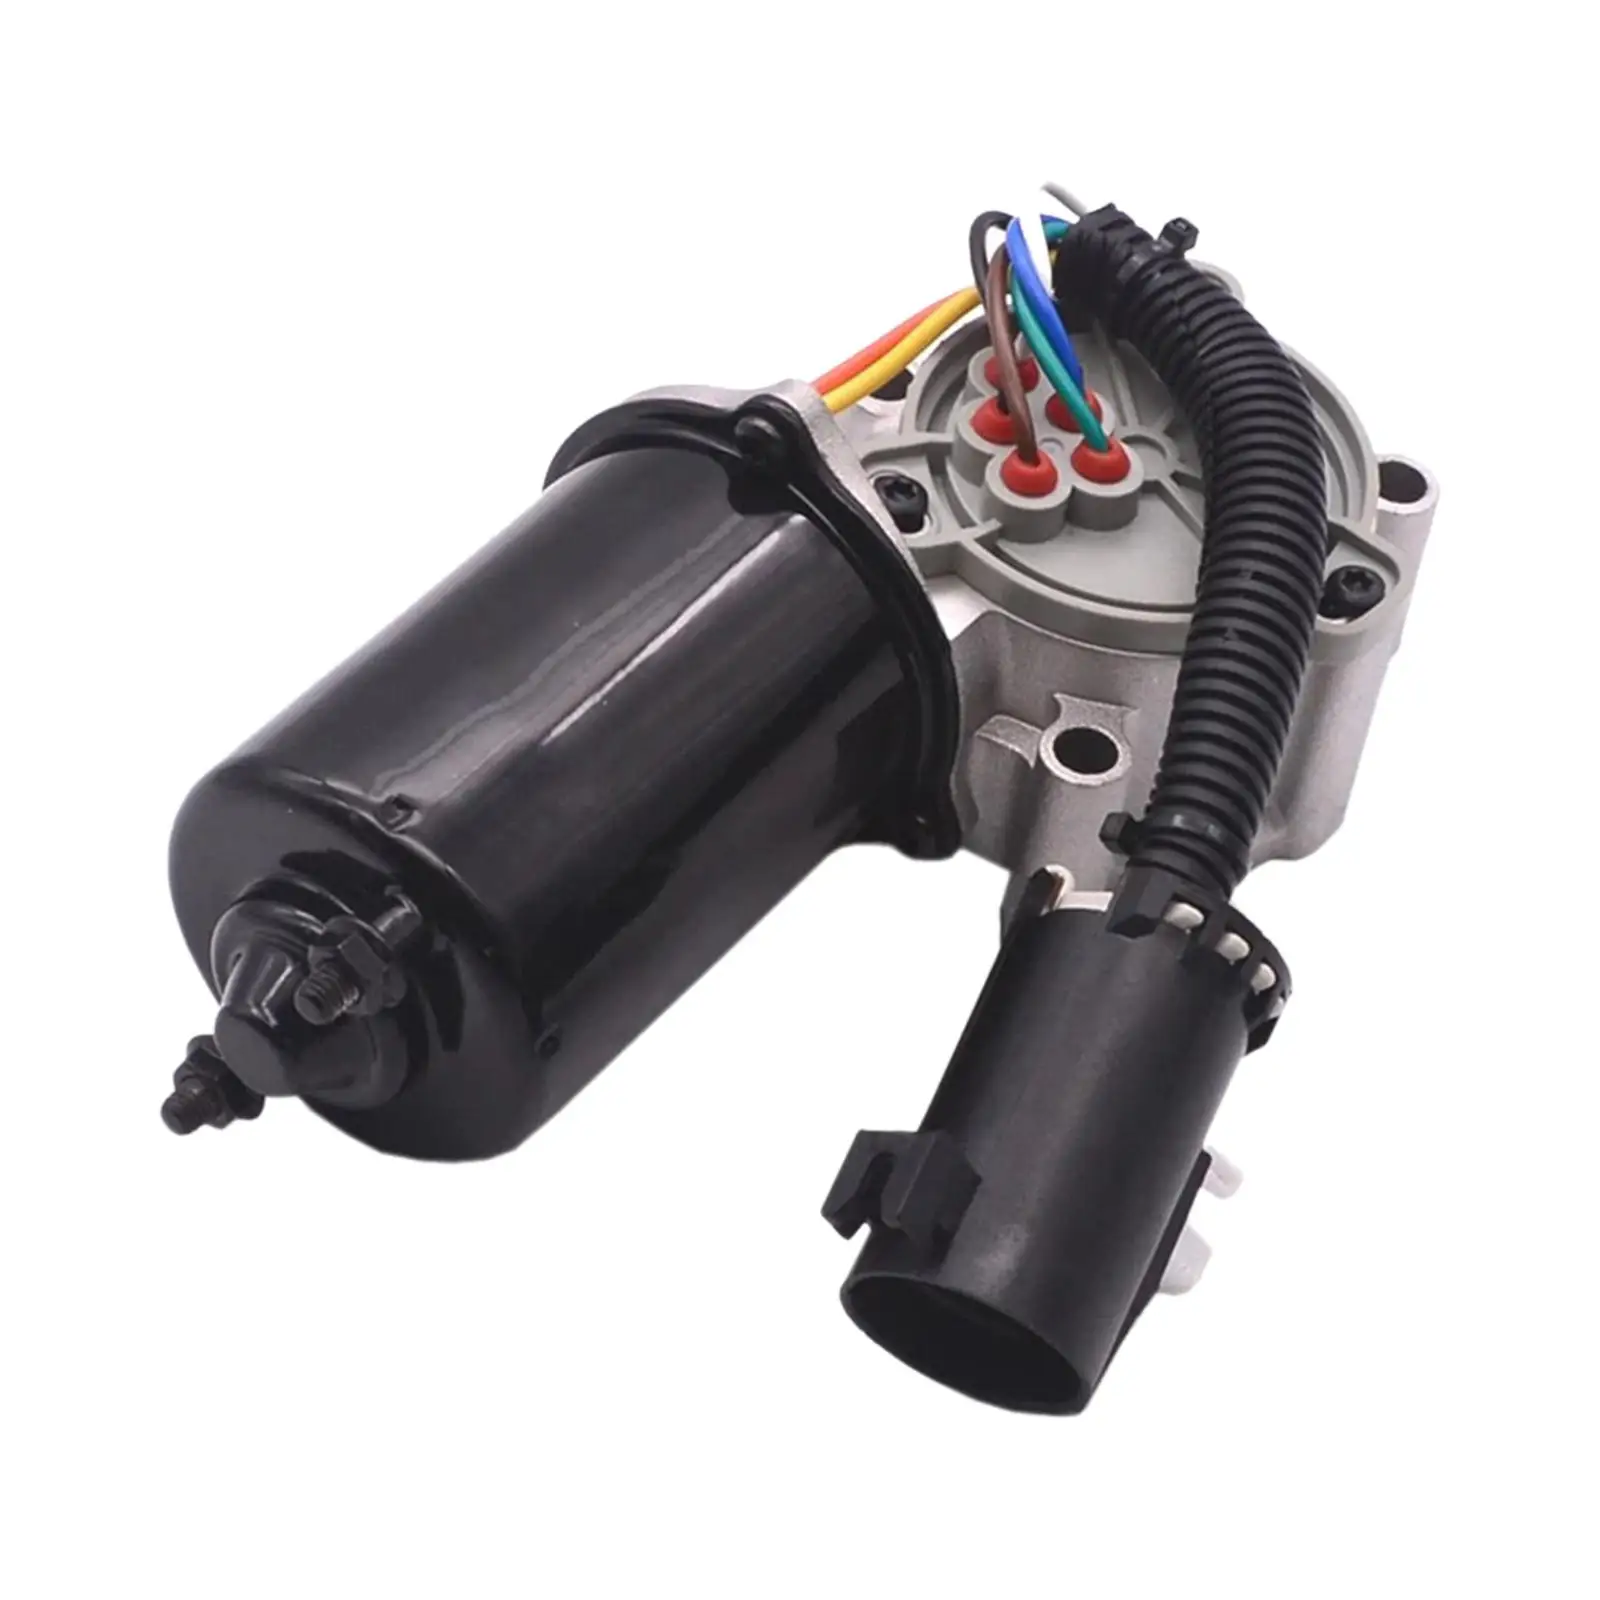 Shift Motor Replaces Car Accessories Durable High Performance Premium Spare